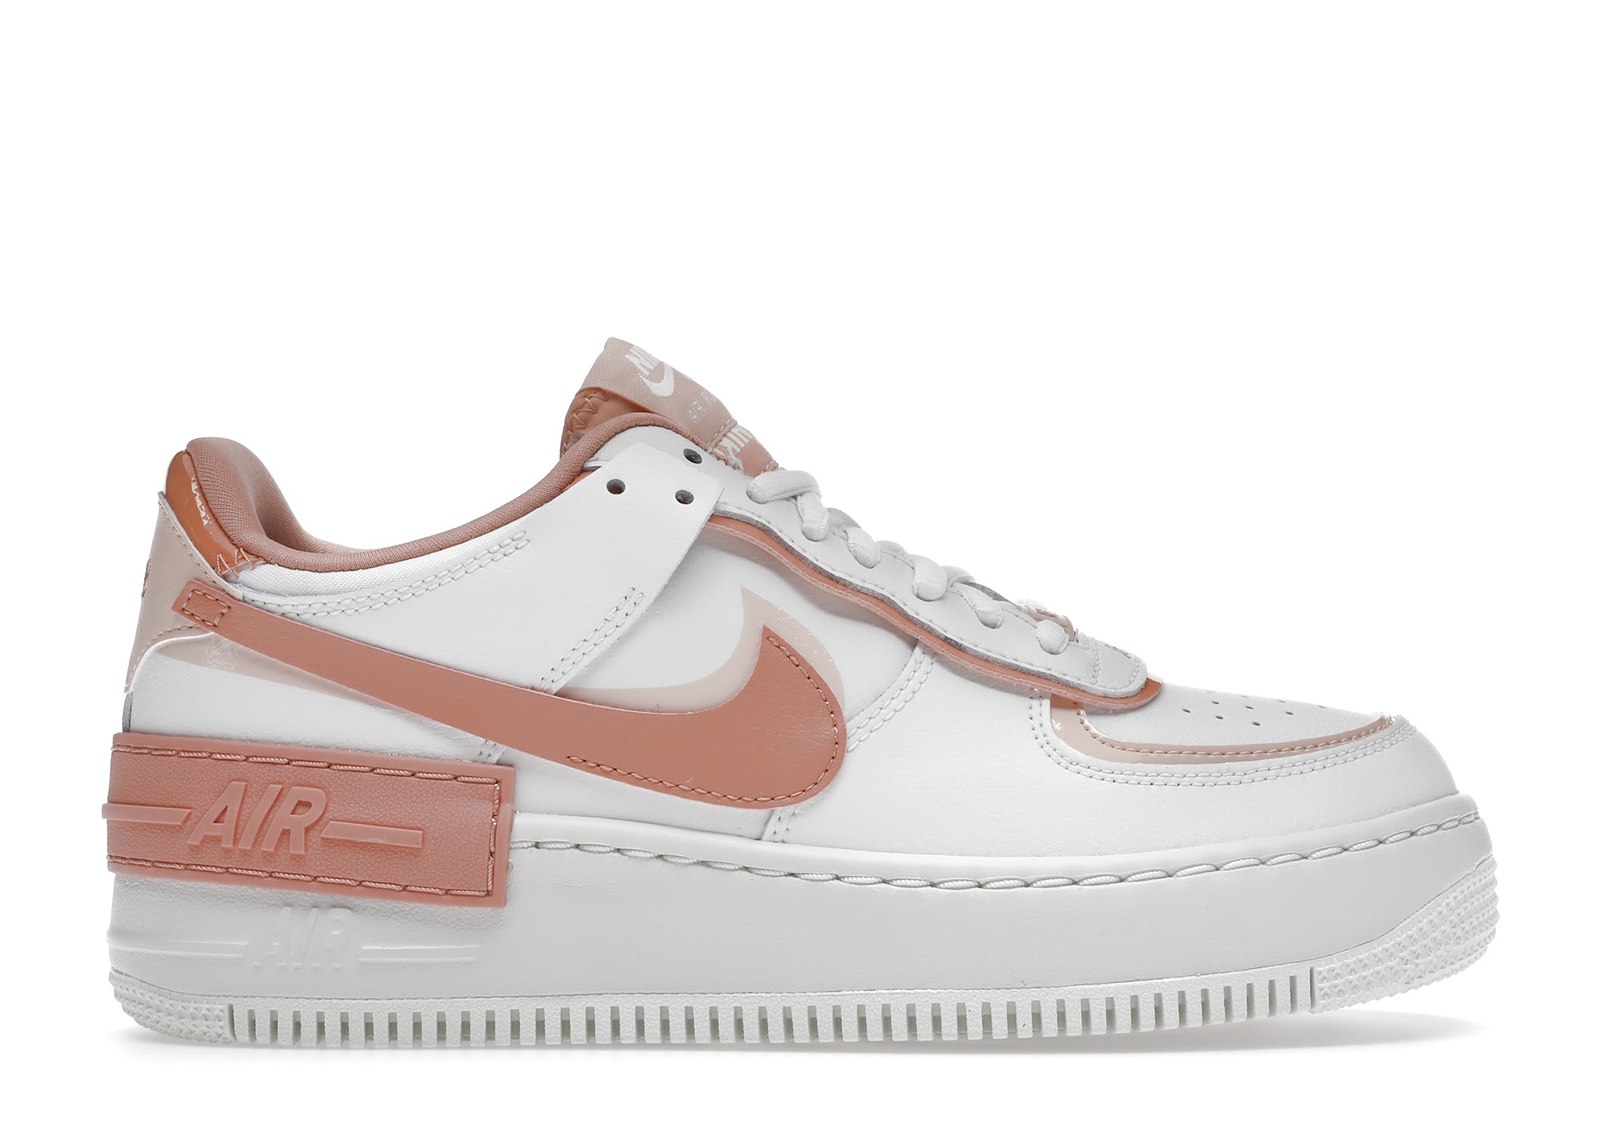 women's nike air force shadow pink